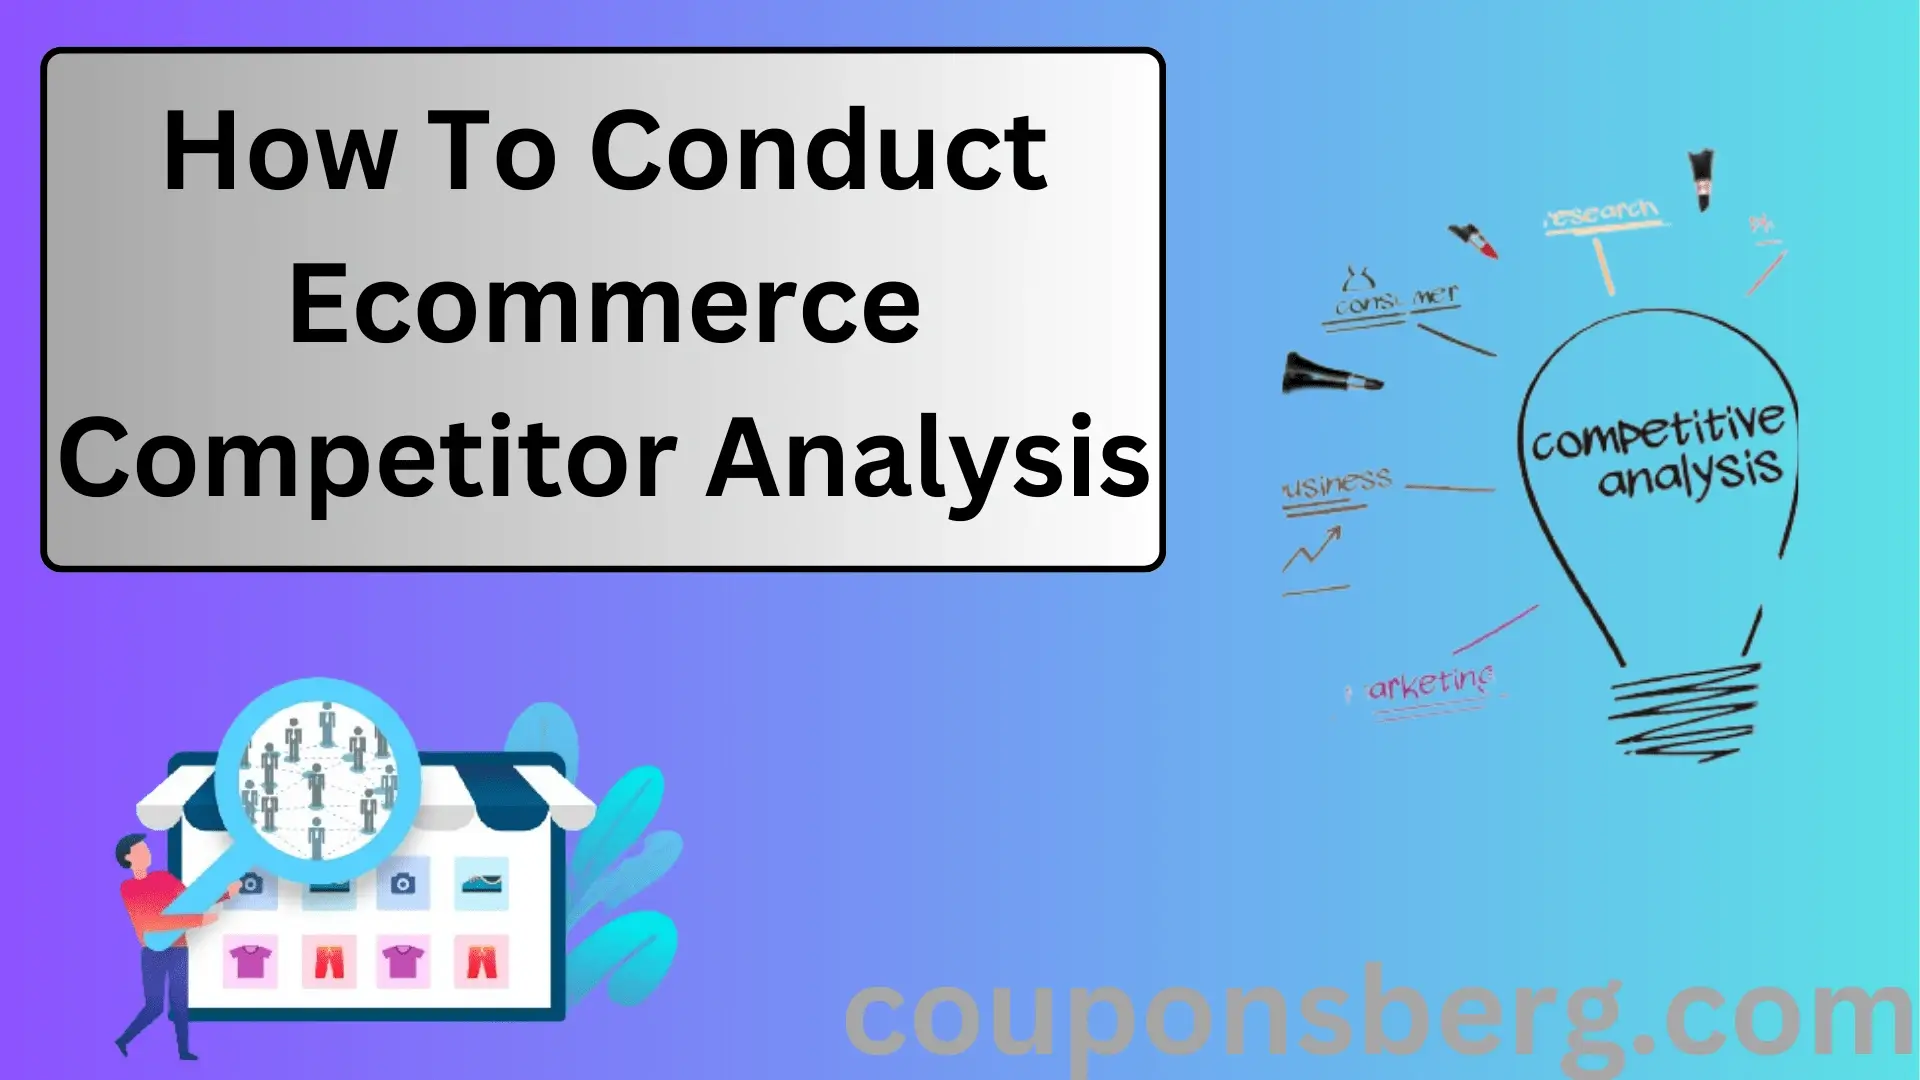 How To Conduct Ecommerce Competitor Analysis